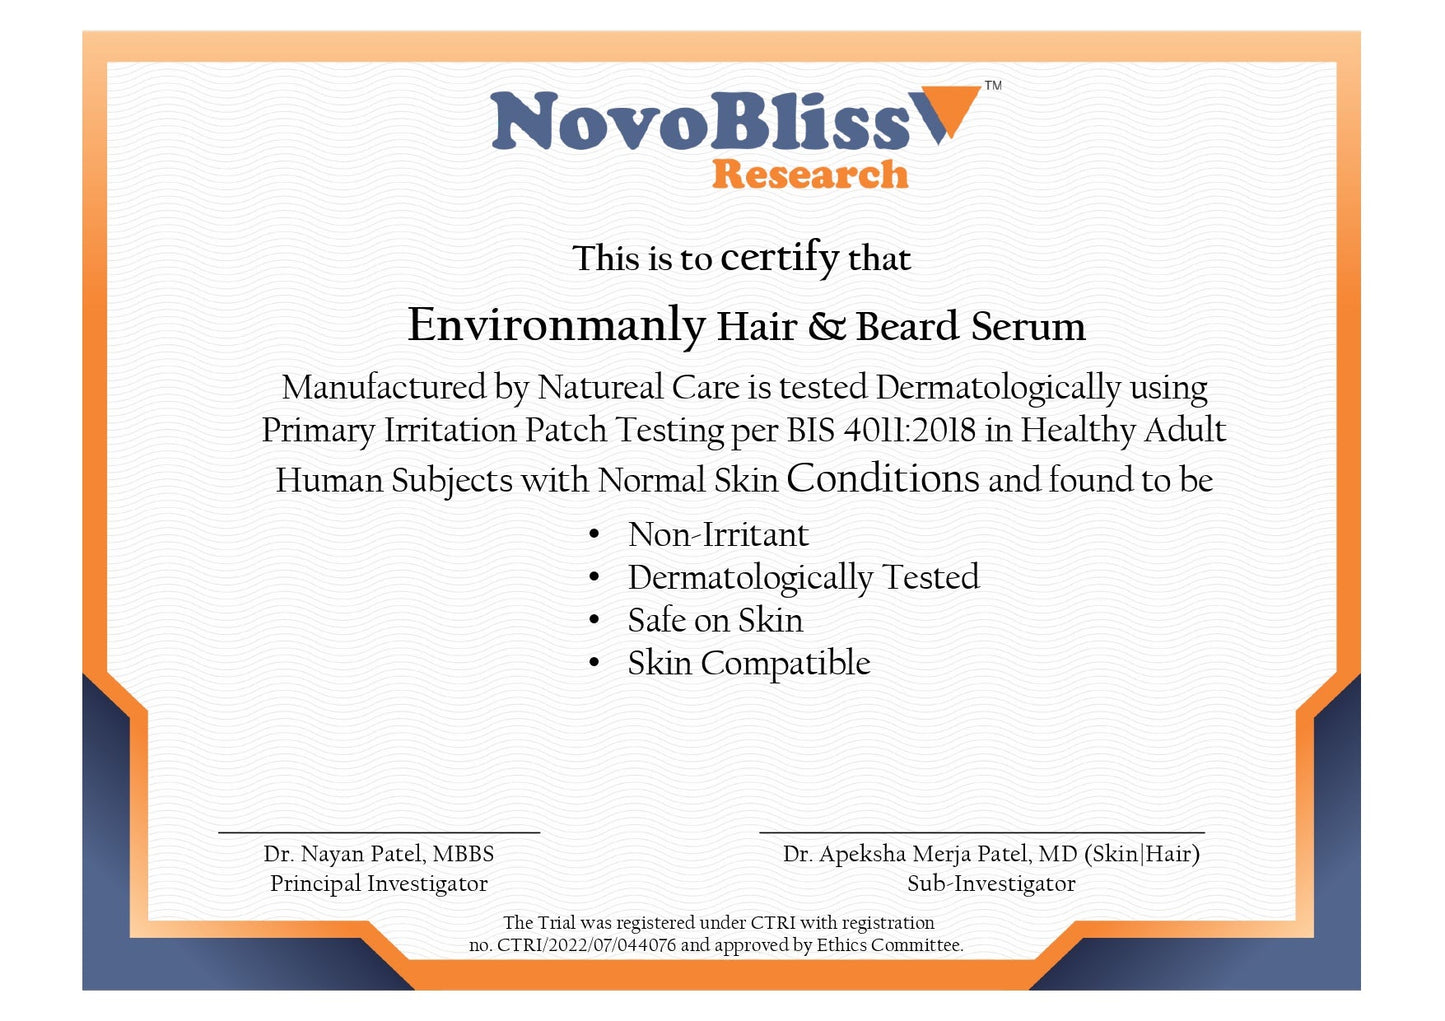 The Full Beard Care Bundle - Environmanly